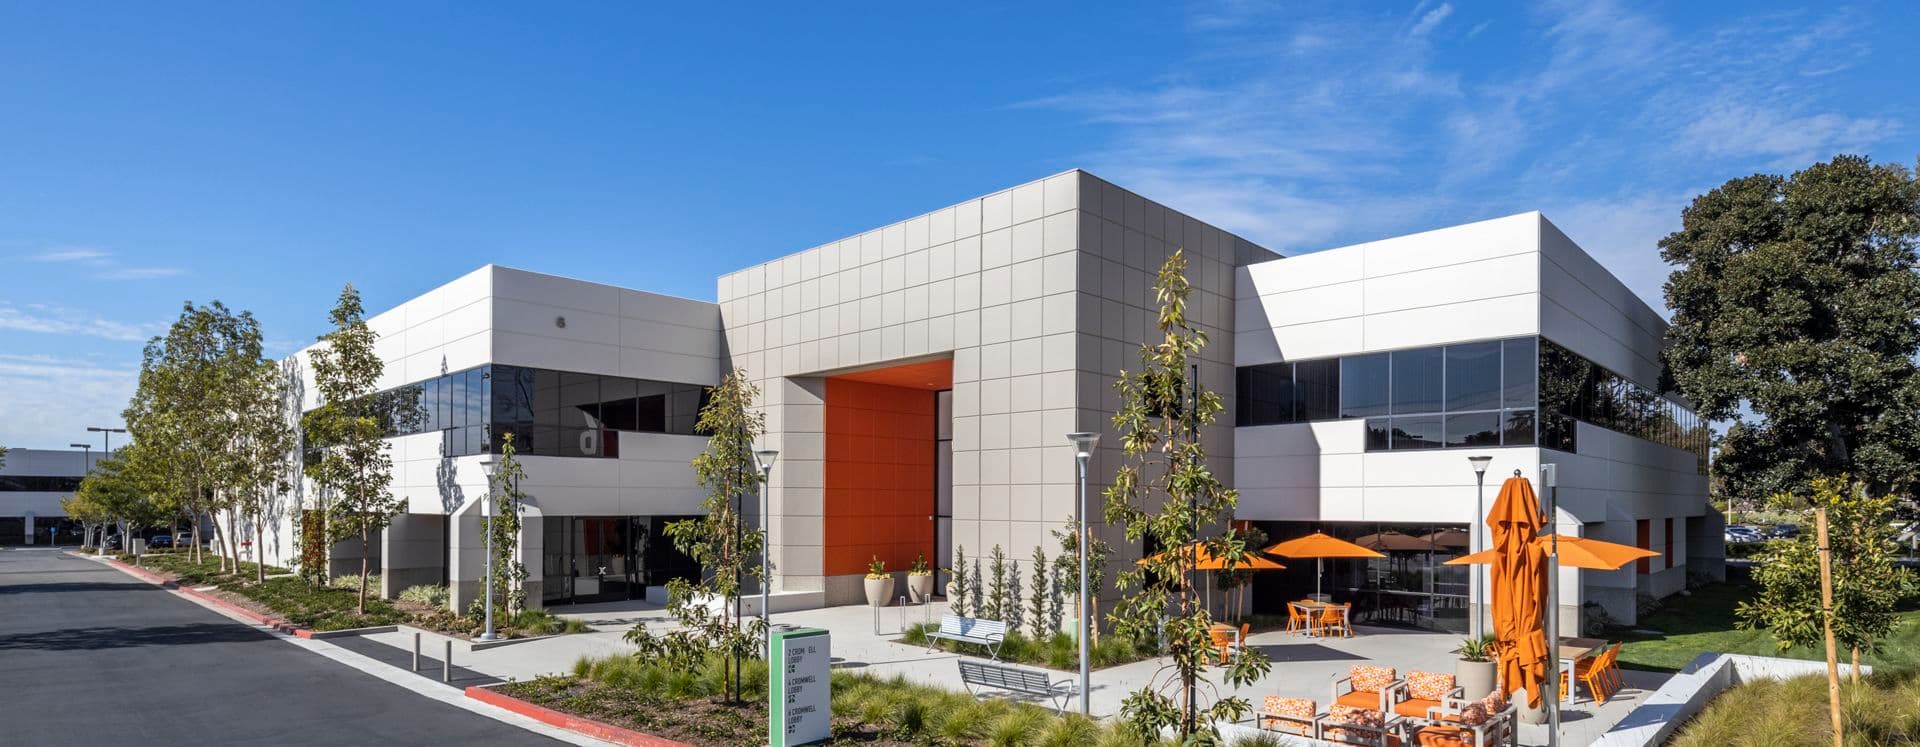 Exterior building photography for Bake Technology Park at 6 Cromwell, Irvine, CA